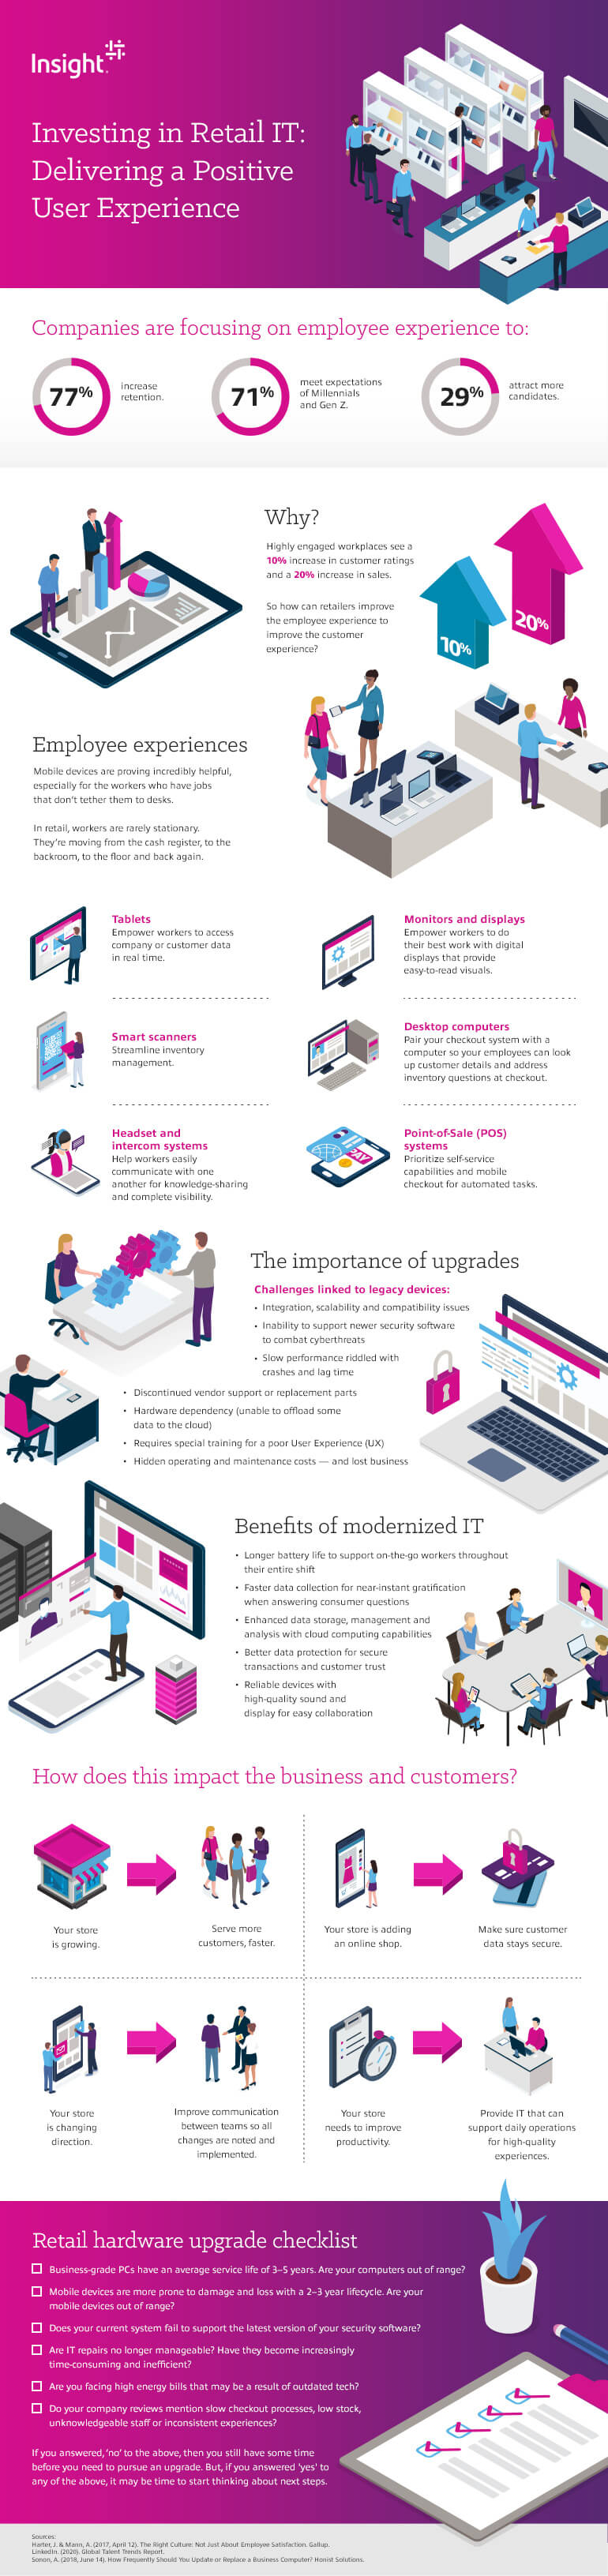 Investing in Retail IT: Delivering a Positive User Experience infographic as transcribed below